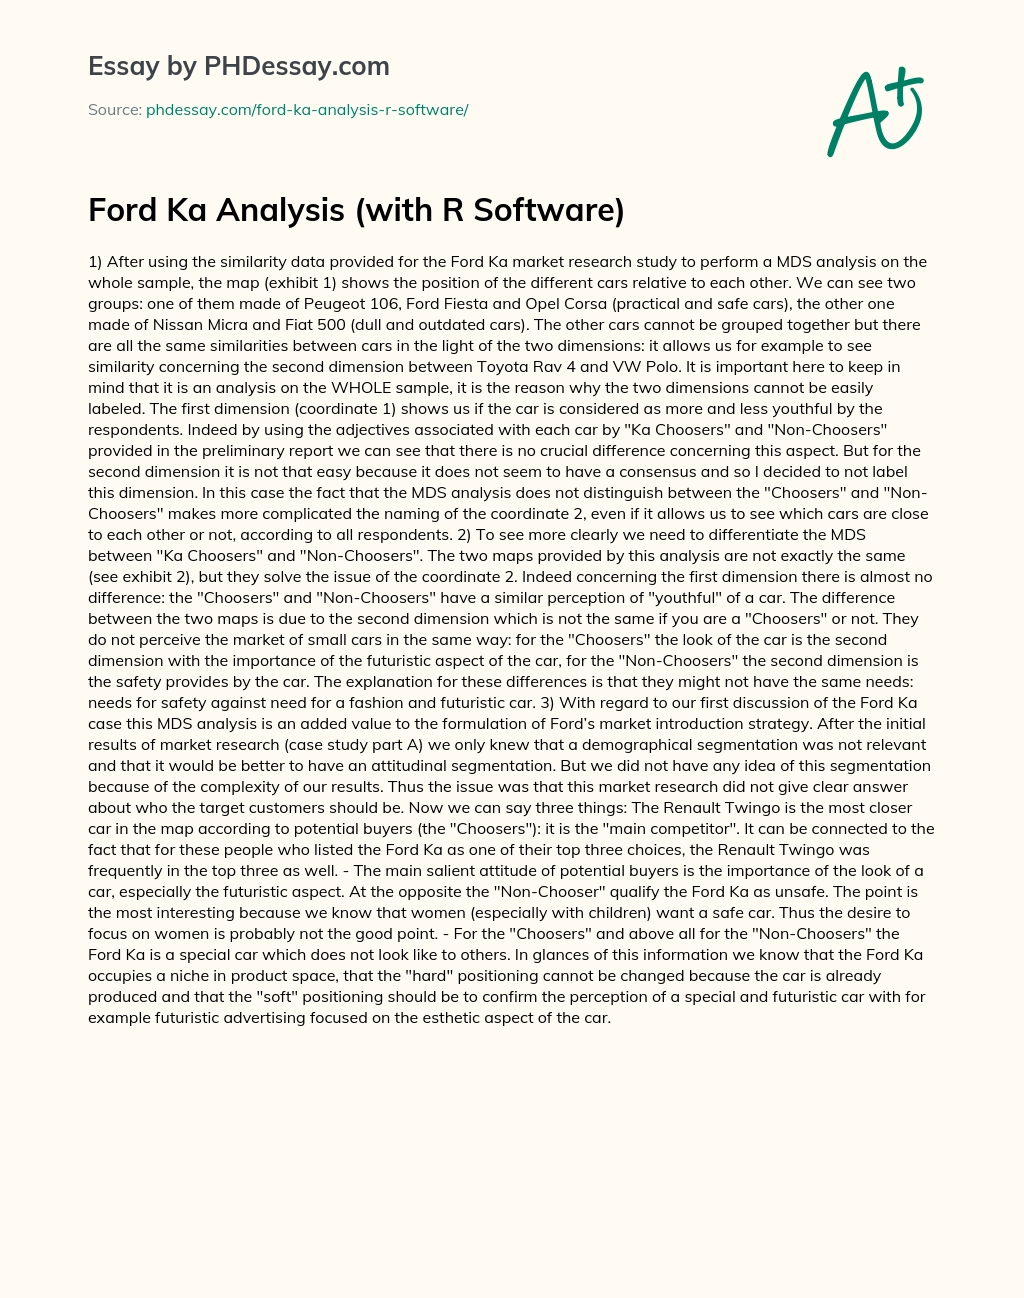 Ford Ka Analysis (with R Software) essay